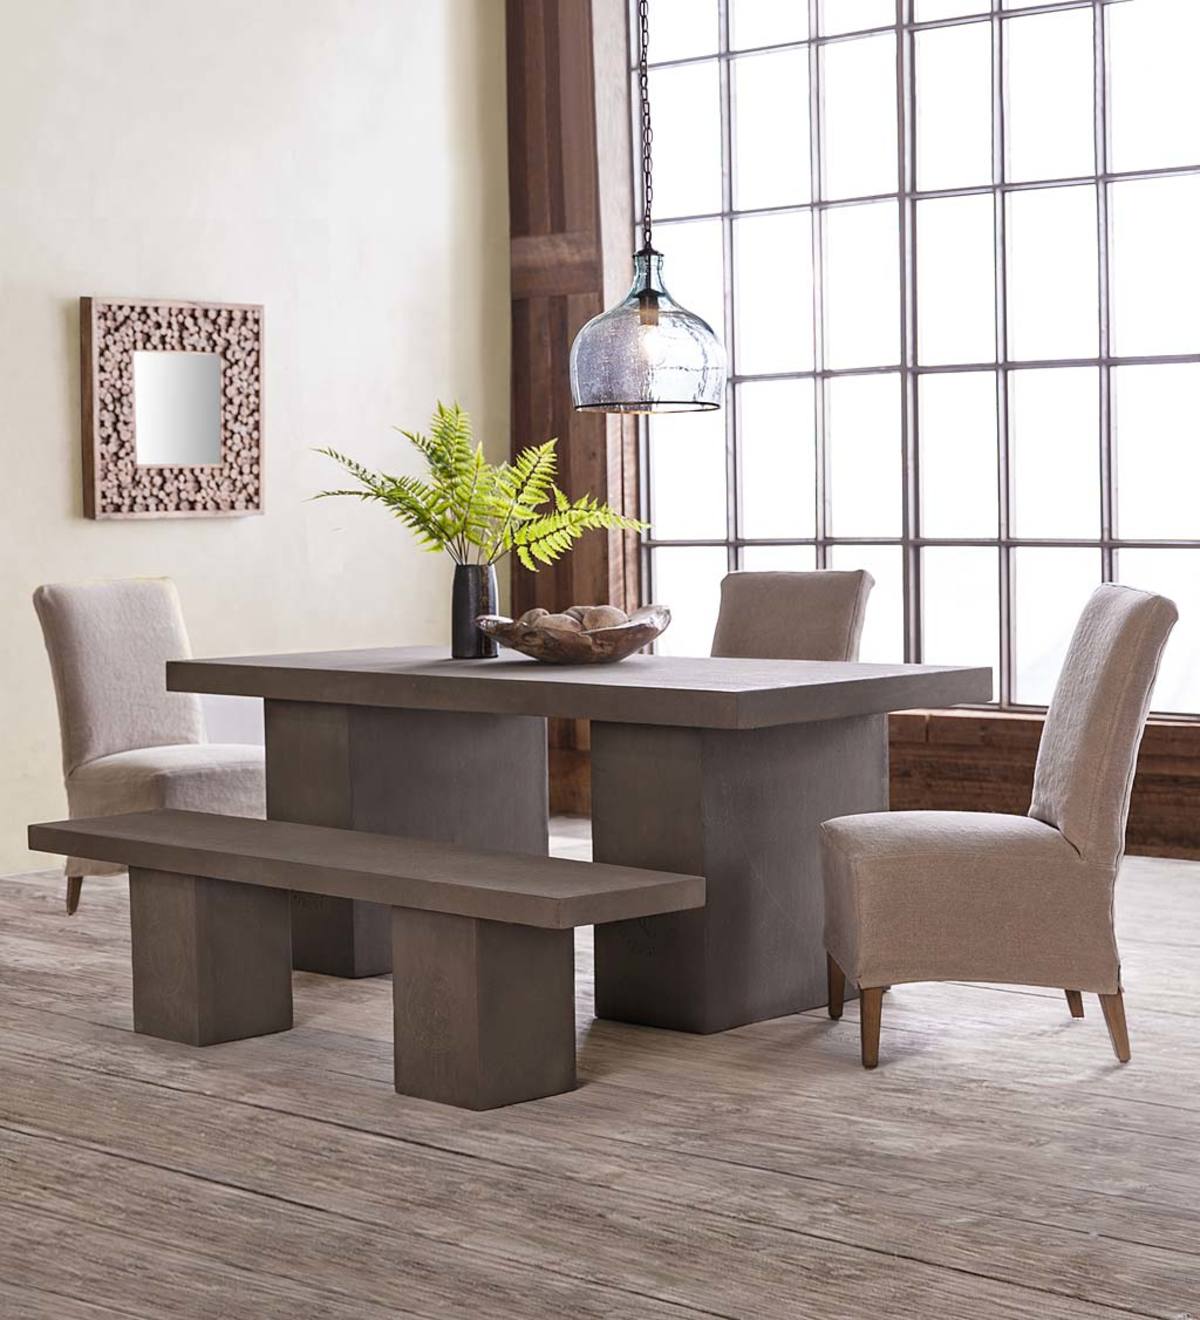 Urban Cement Company™ Dining Collection | VivaTerra